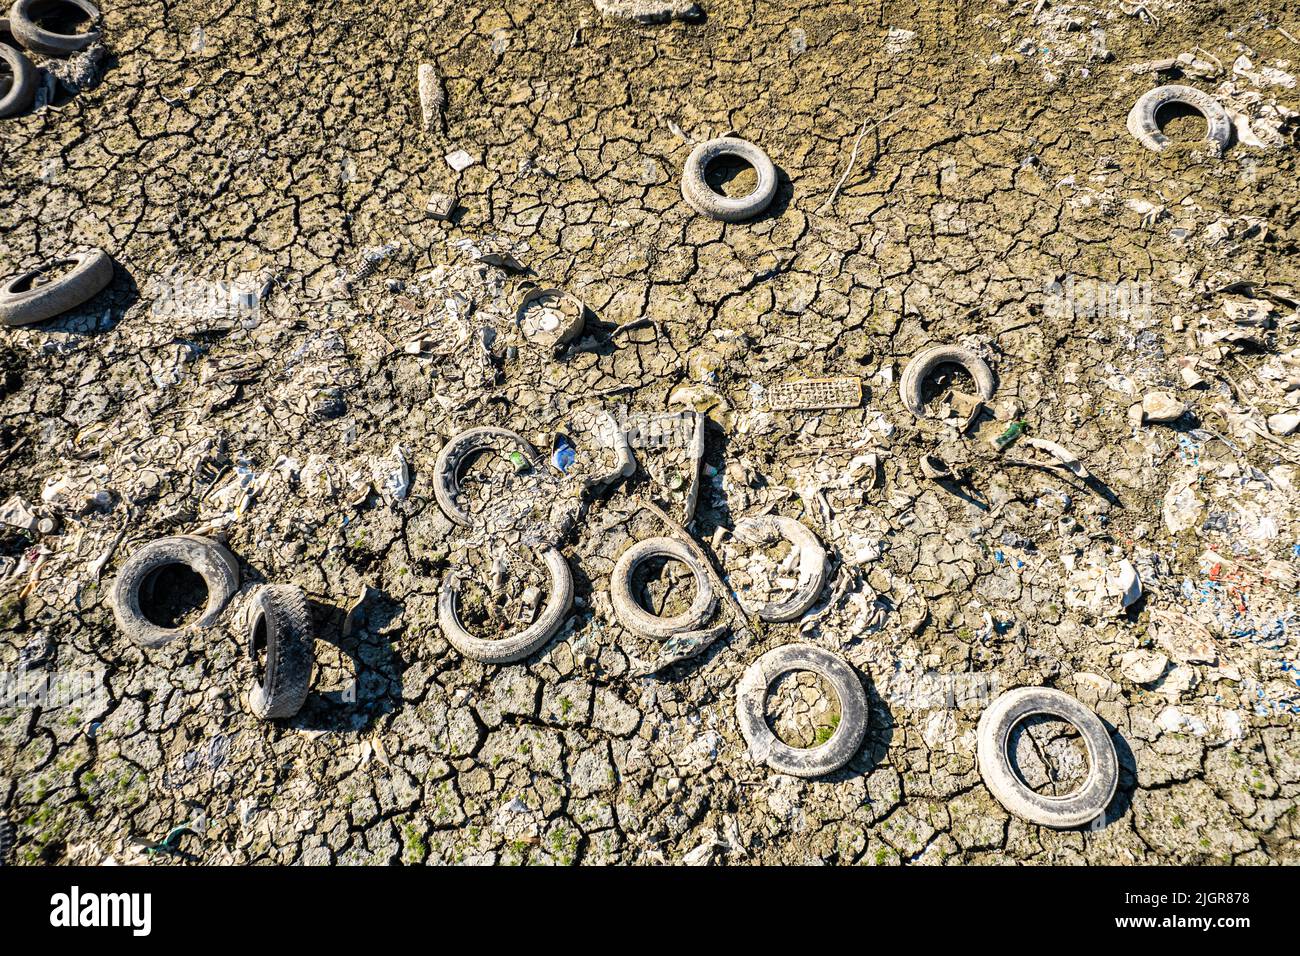 Old tire illegally abandoned in Po river visible due to drought. Carmagnola, Italy - July 2022 Stock Photo